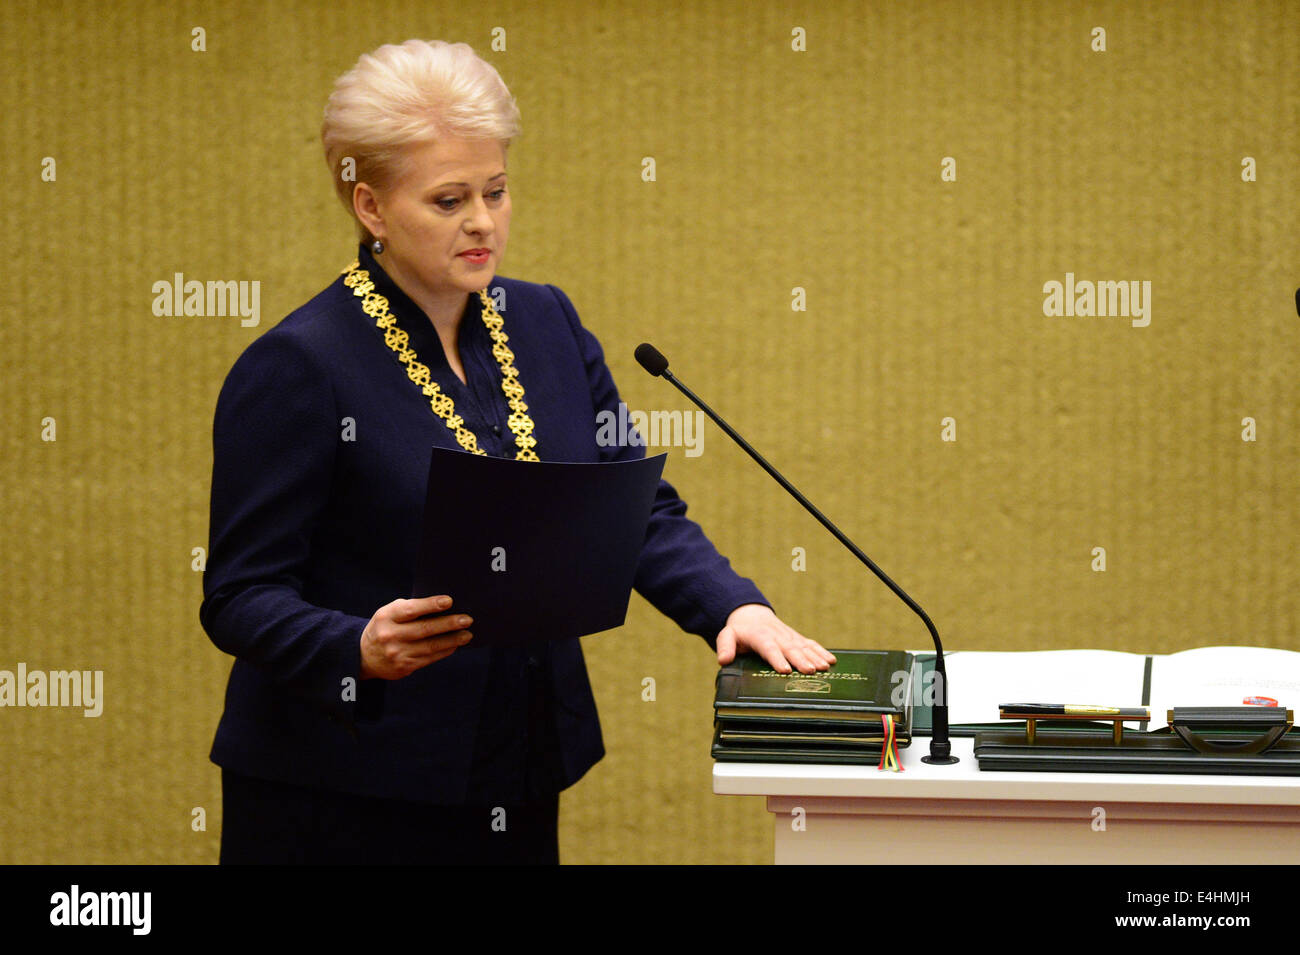 Vilnius, Lithuania. 12th July, 2014. Dalia Grybauskaite takes an oath on her inauguration of presidency in Vilnius, Lithuania, on July 12, 2014. Grybauskaite was reelected president of Lithuania in May with roughly 58 percent of supportive votes, making her the first president of the Baltic country to be consecutively elected. Credit:  Alfredas Pliadis/Xinhua/Alamy Live News Stock Photo